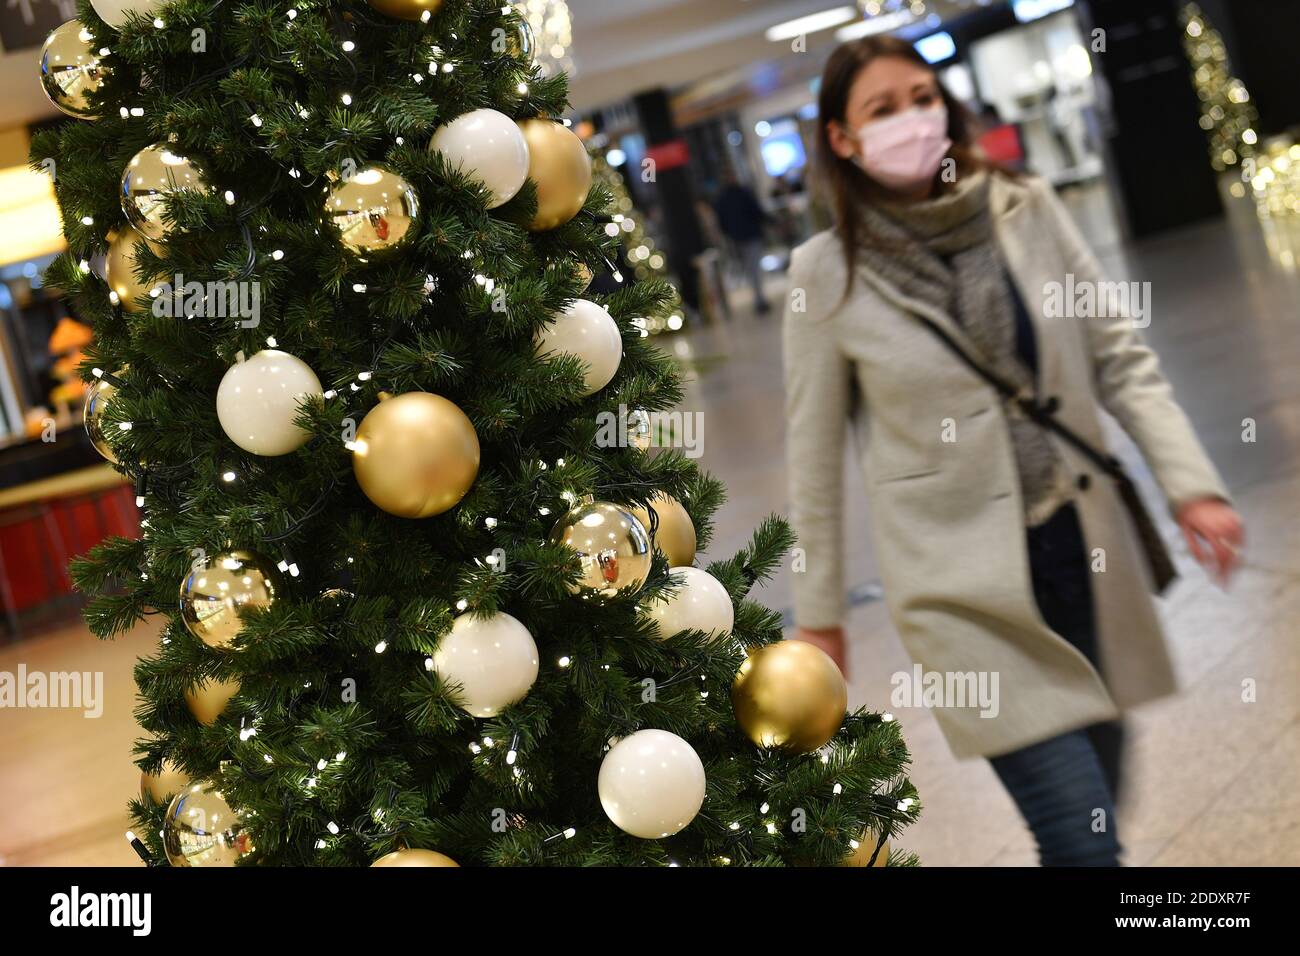 Topic picture prisoners in the coronavirus pandemic on November 26th, 2020. A young woman with face mask, mask walks past a Weihaftertsbaum in a mall, shopping center. Pandemic, lockdown, shutdown, incidence value. MODEL RELEASED! | usage worldwide Stock Photo